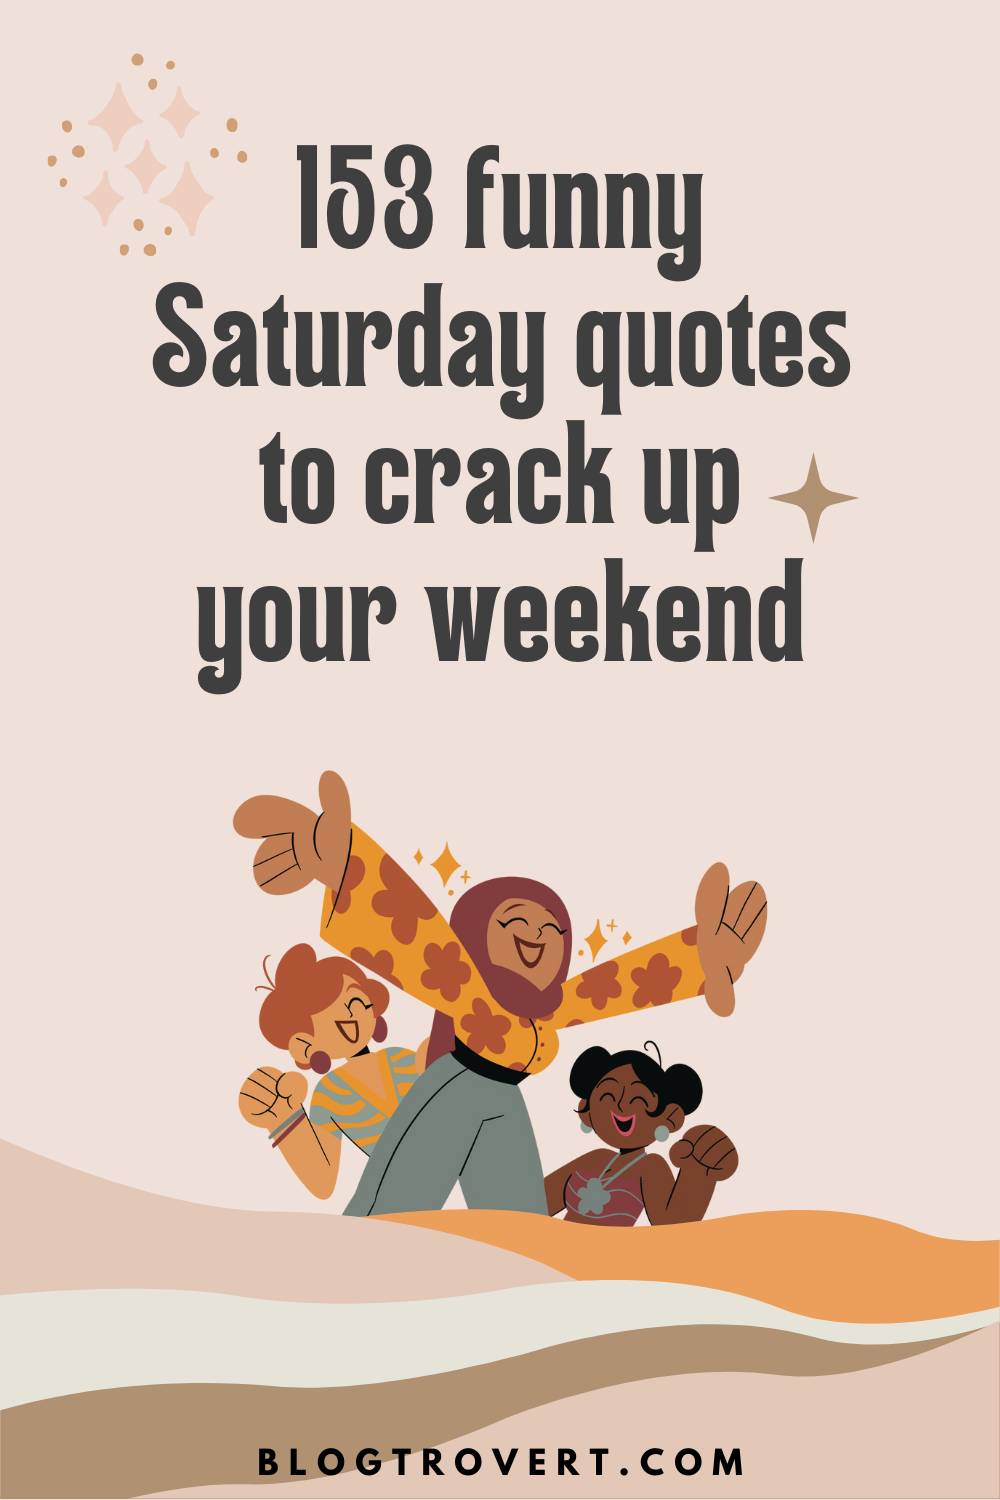 153 funny Saturday quotes to crack up your weekend 3